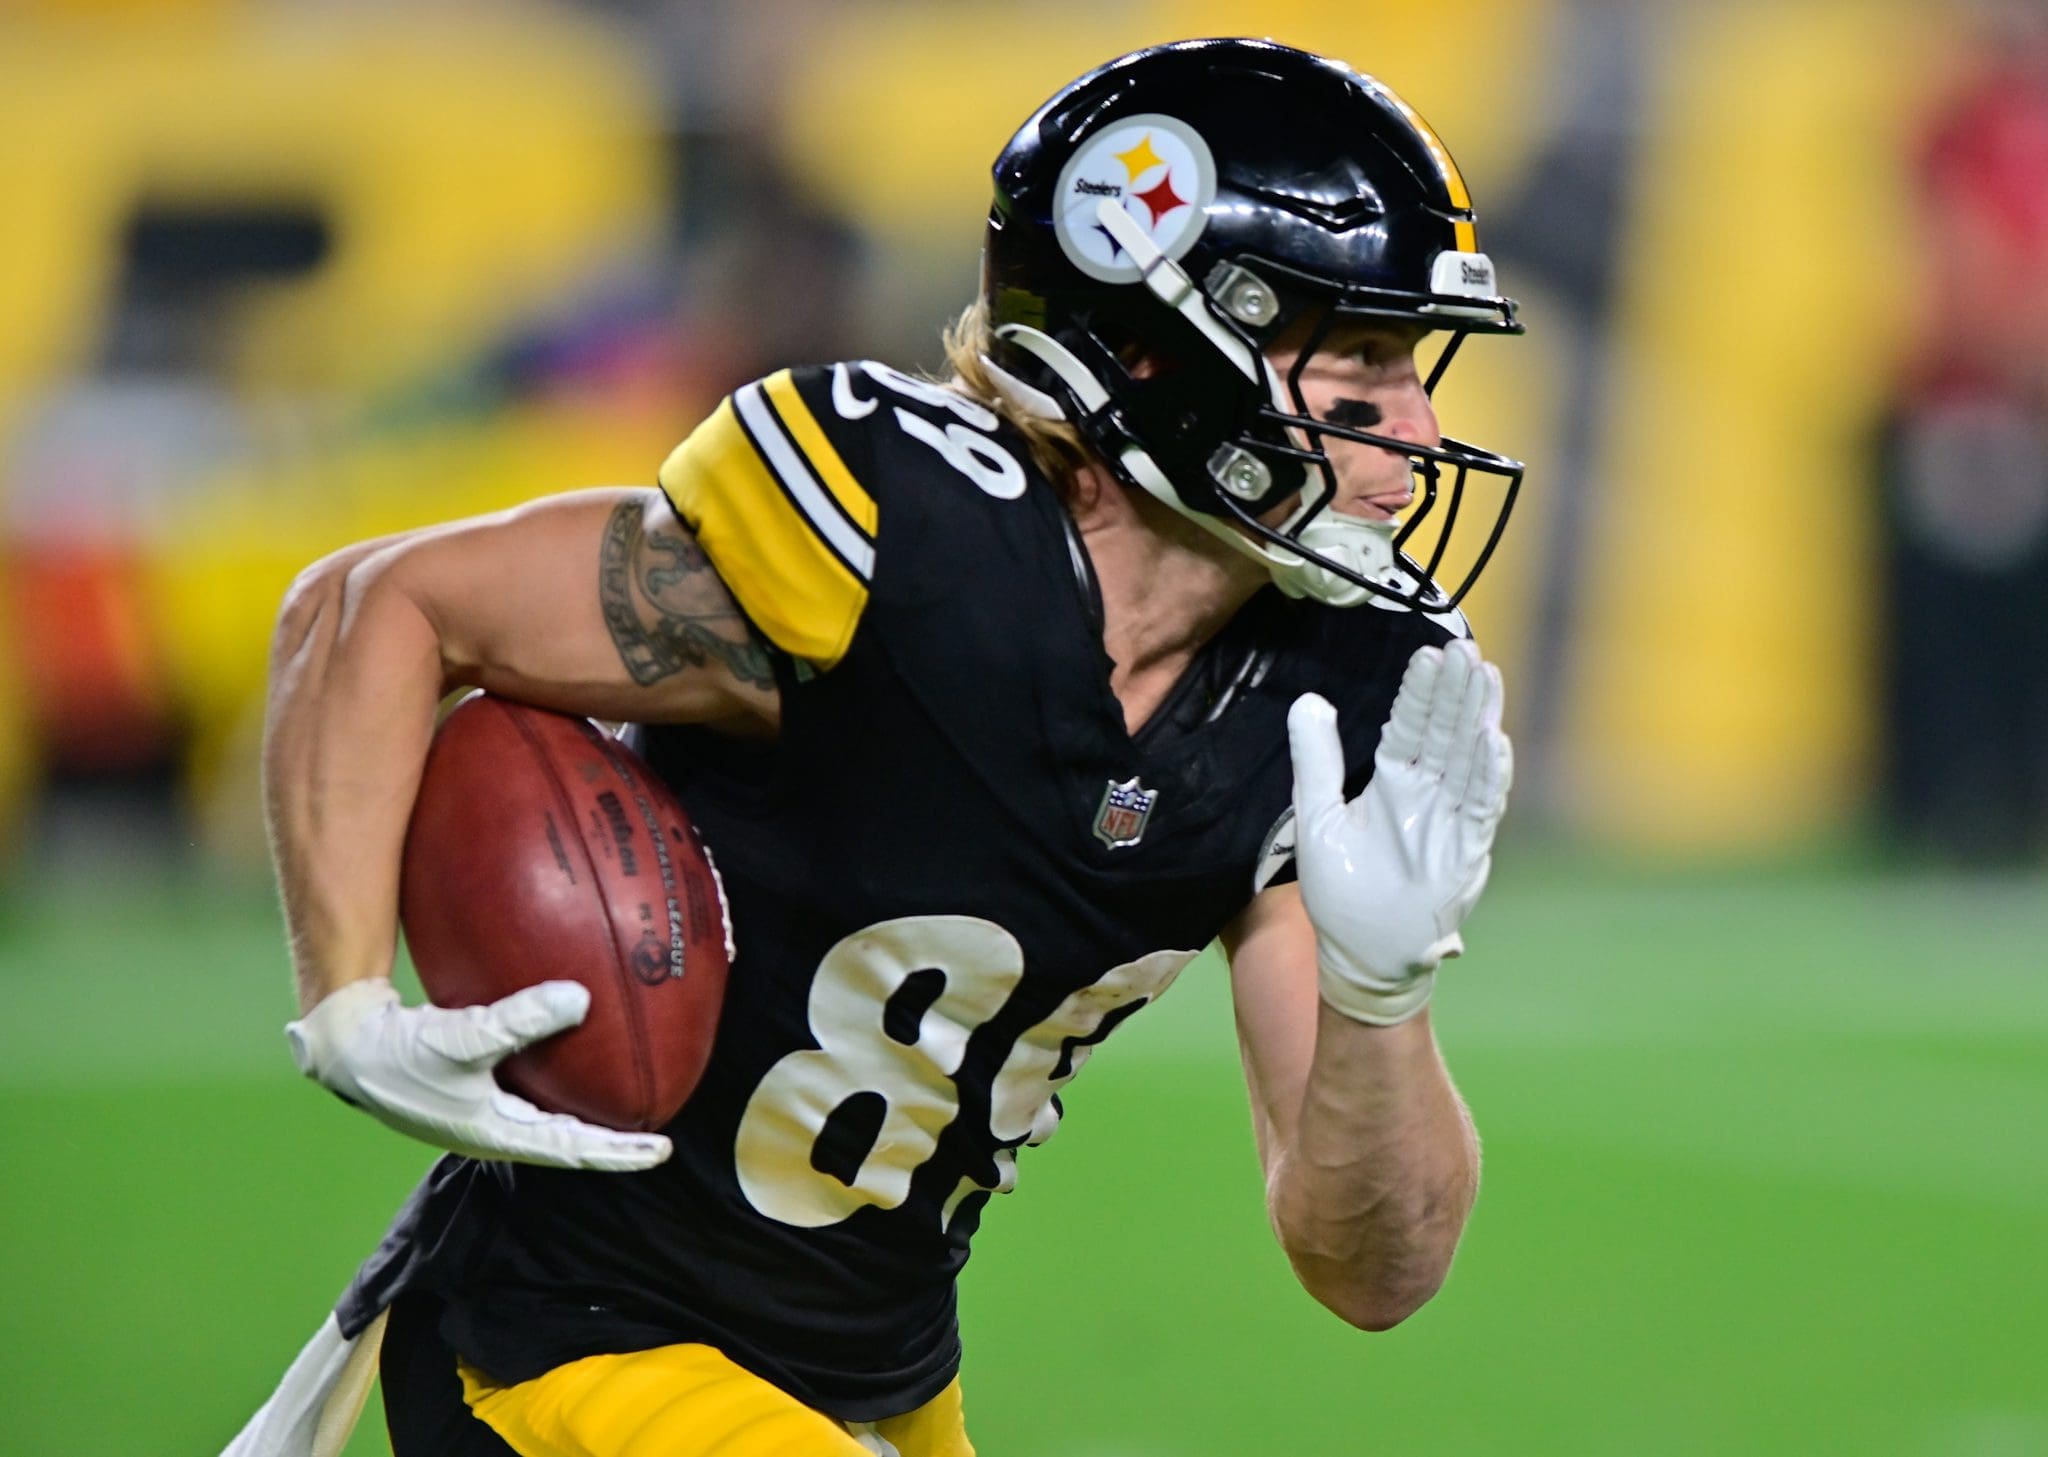 Gunner Olszewski Out with Concussion, Steelers Down to 4 WRs